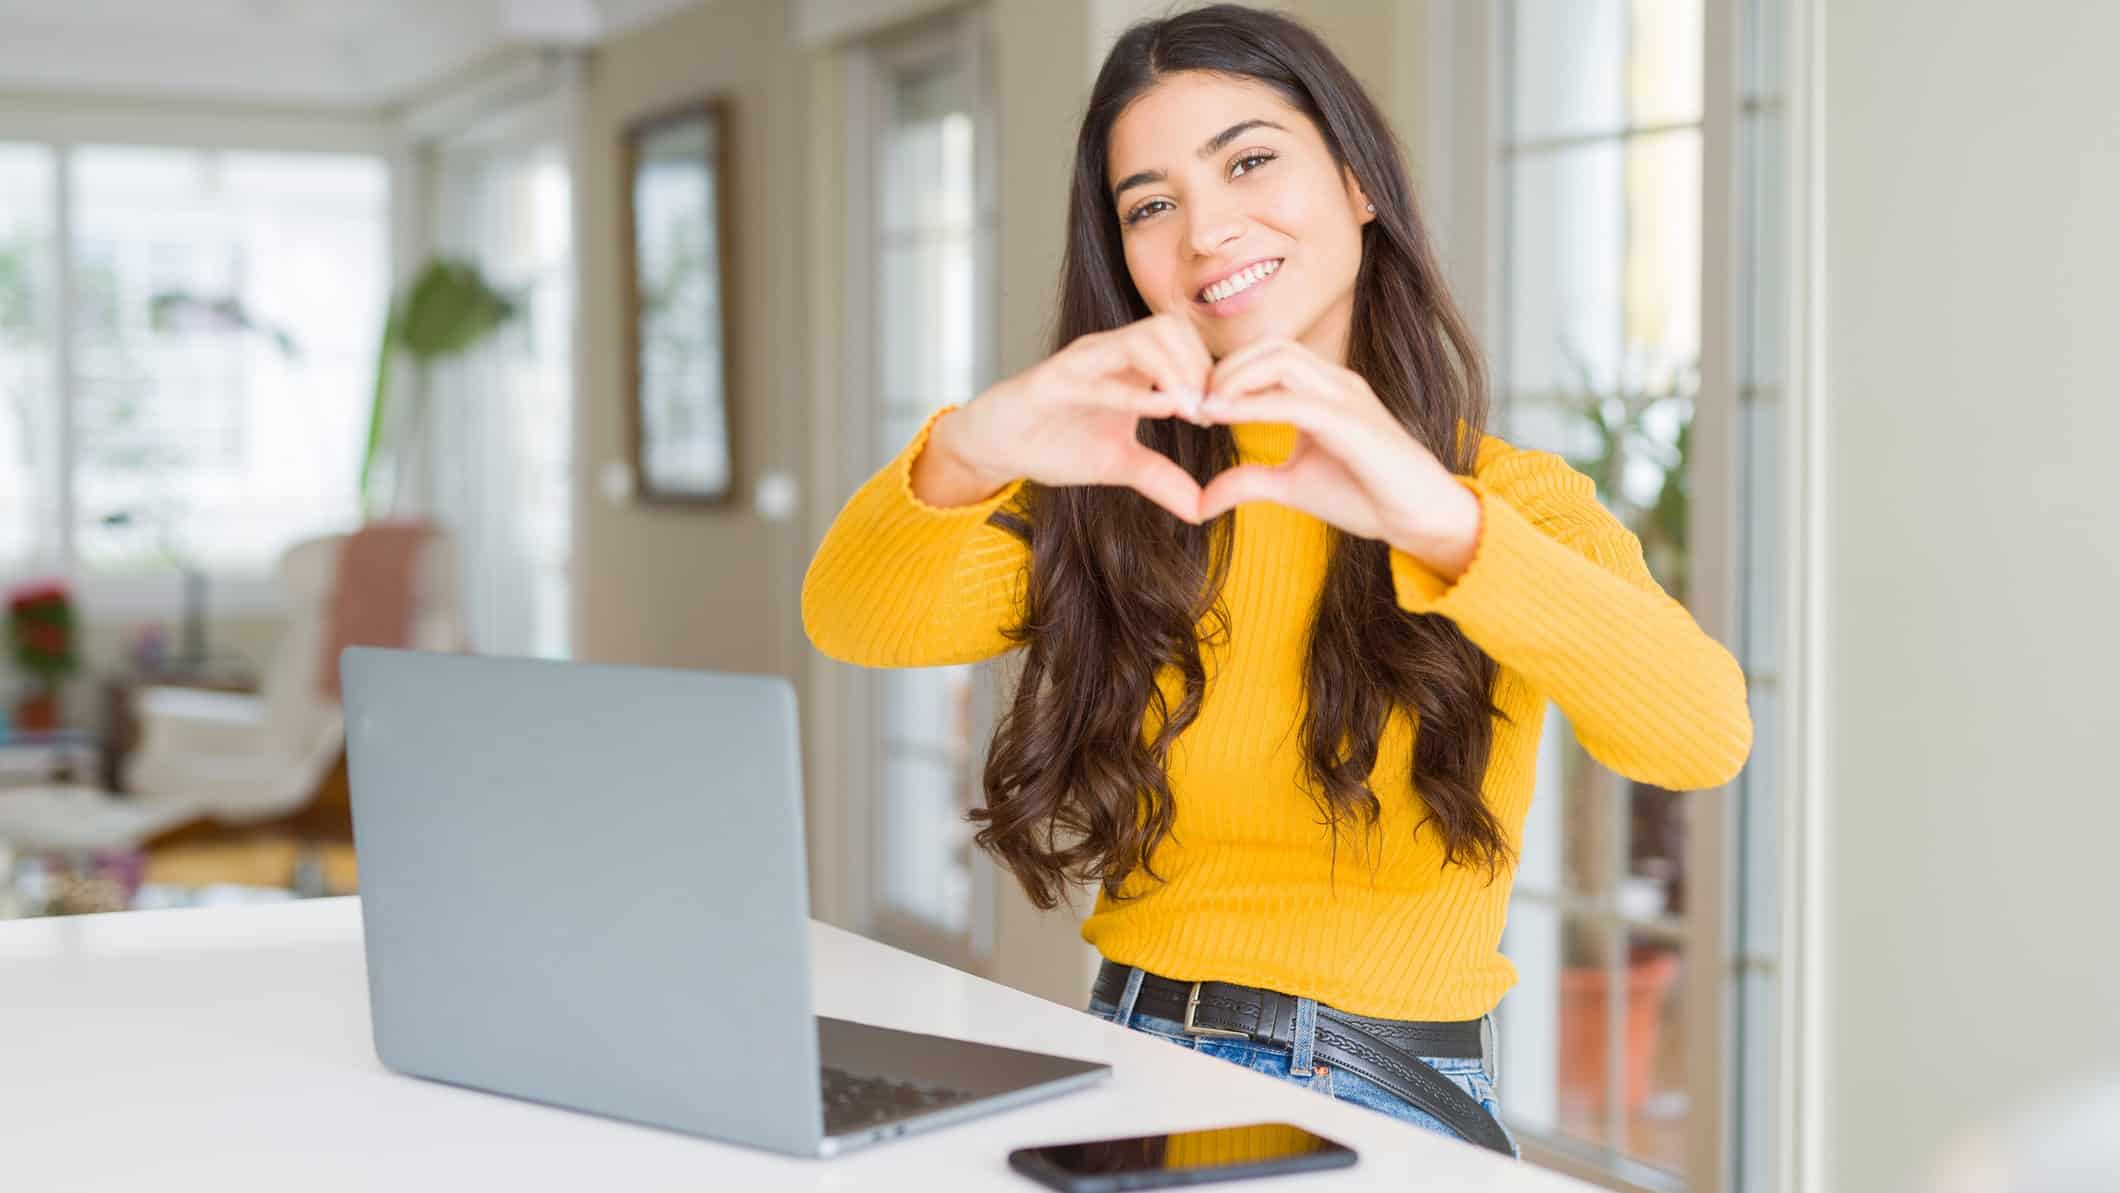 Young woman using computer laptop smiling in love showing heart symbol and shape with hands. as she switches from a big telco to Aussie Broadband which is capturing more market share